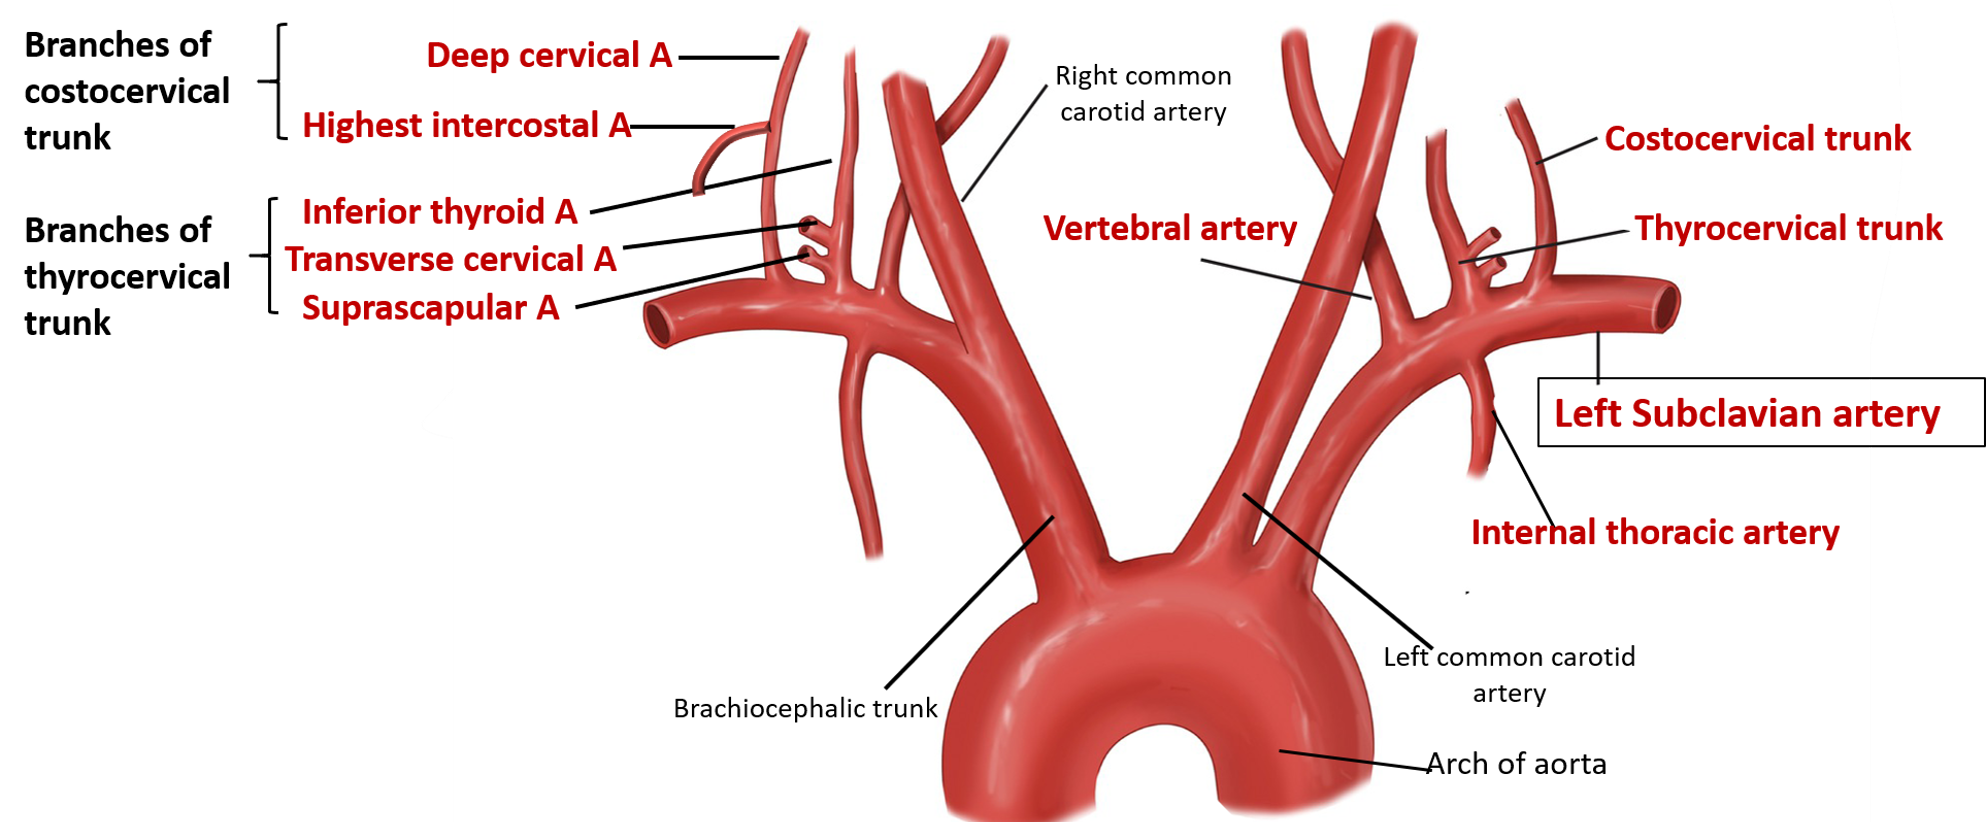 branches of subclavian artery